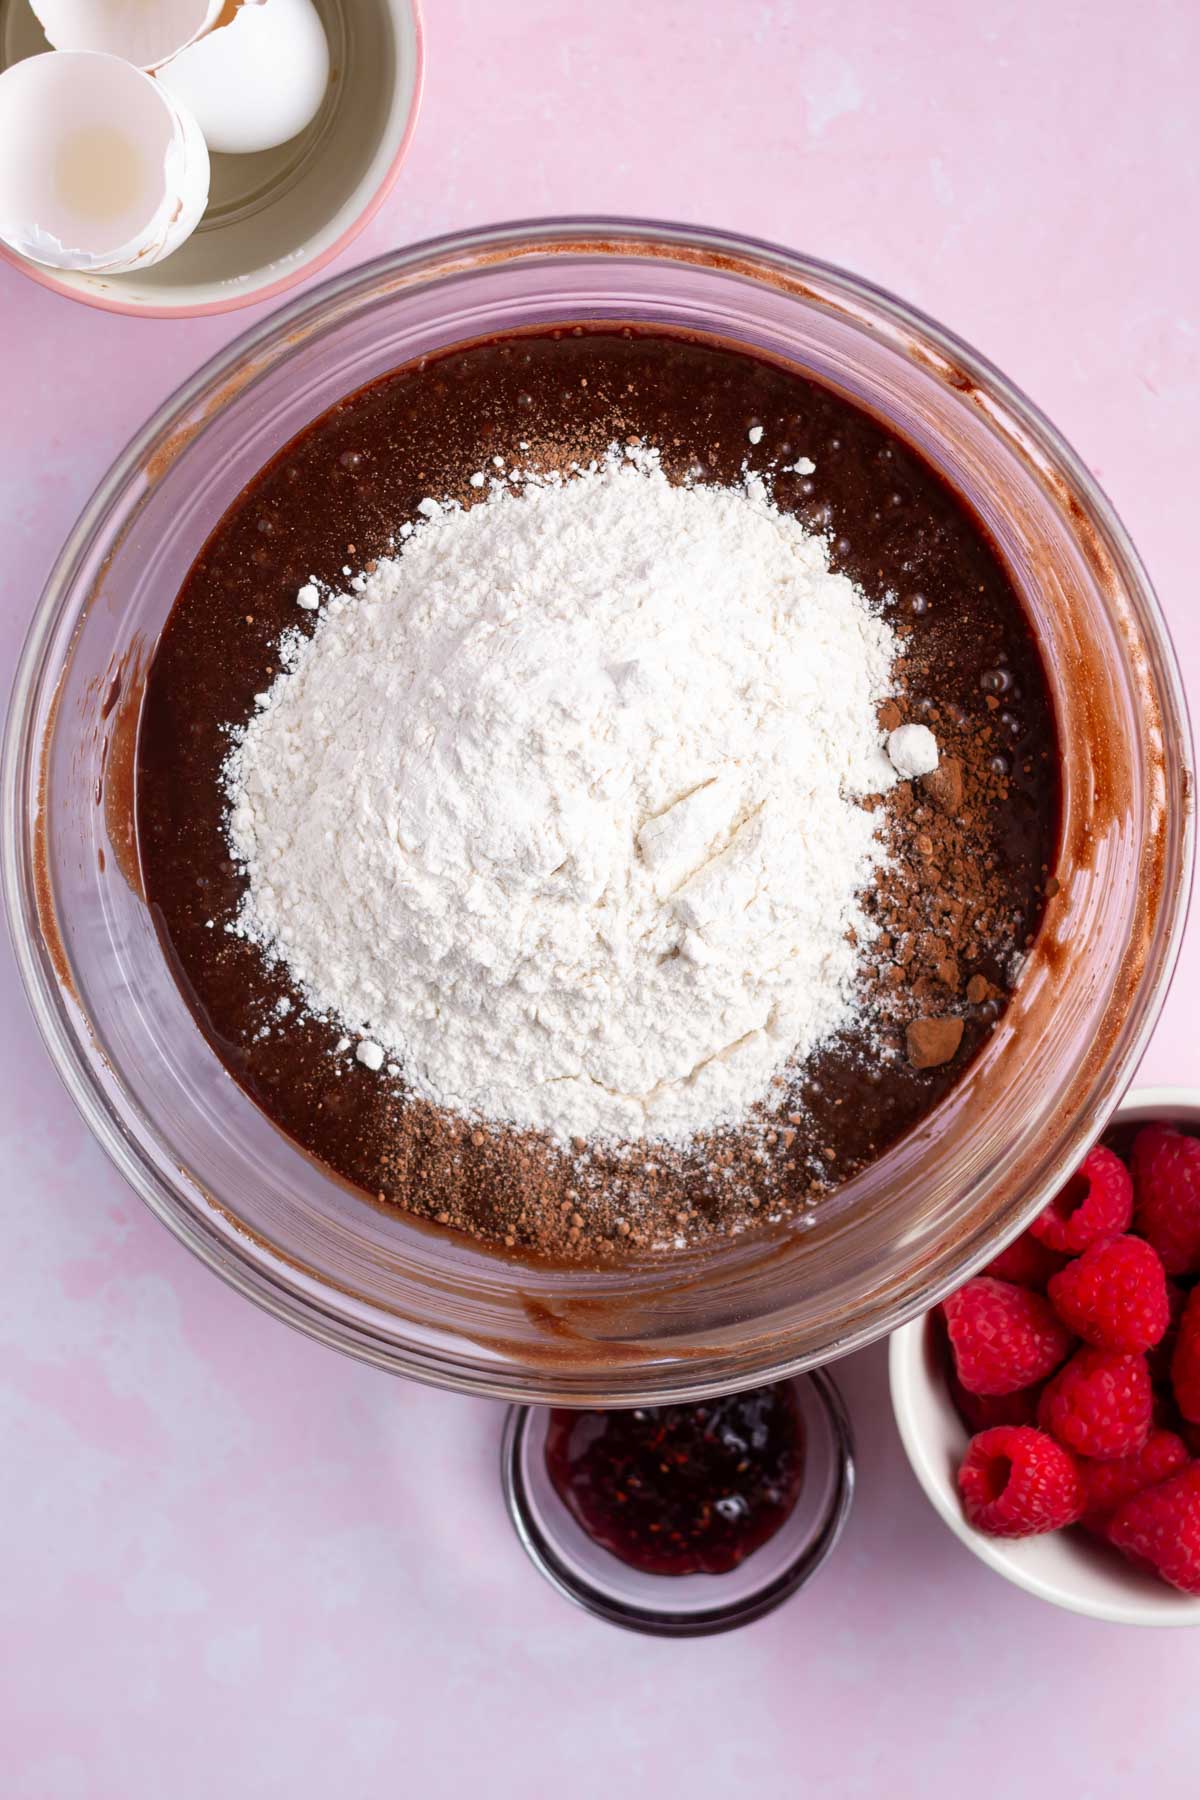 cocoa powder and flour added on top of the brownie batter in a bowl